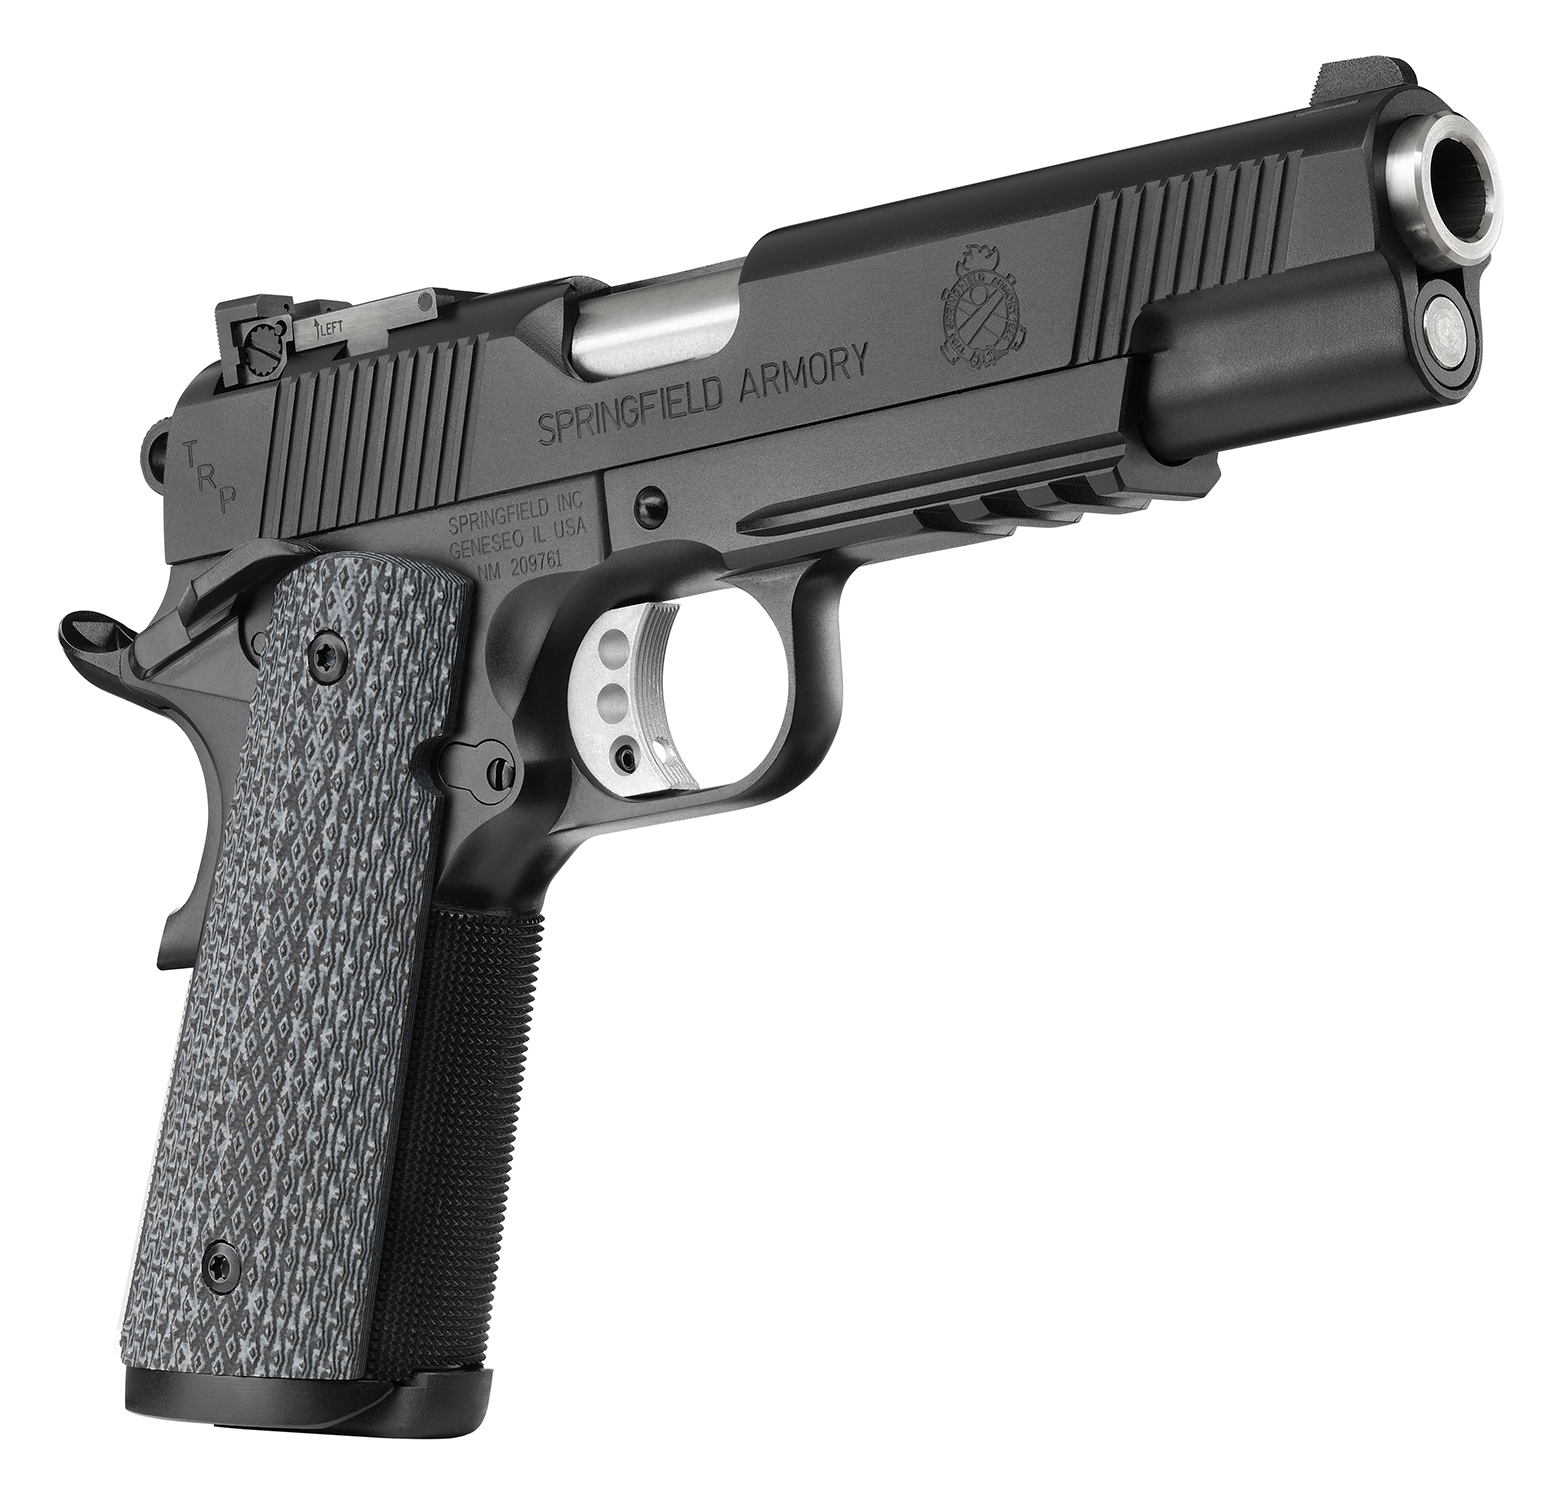 1565x1500 > Springfield Armory 1911 Pistol Wallpapers